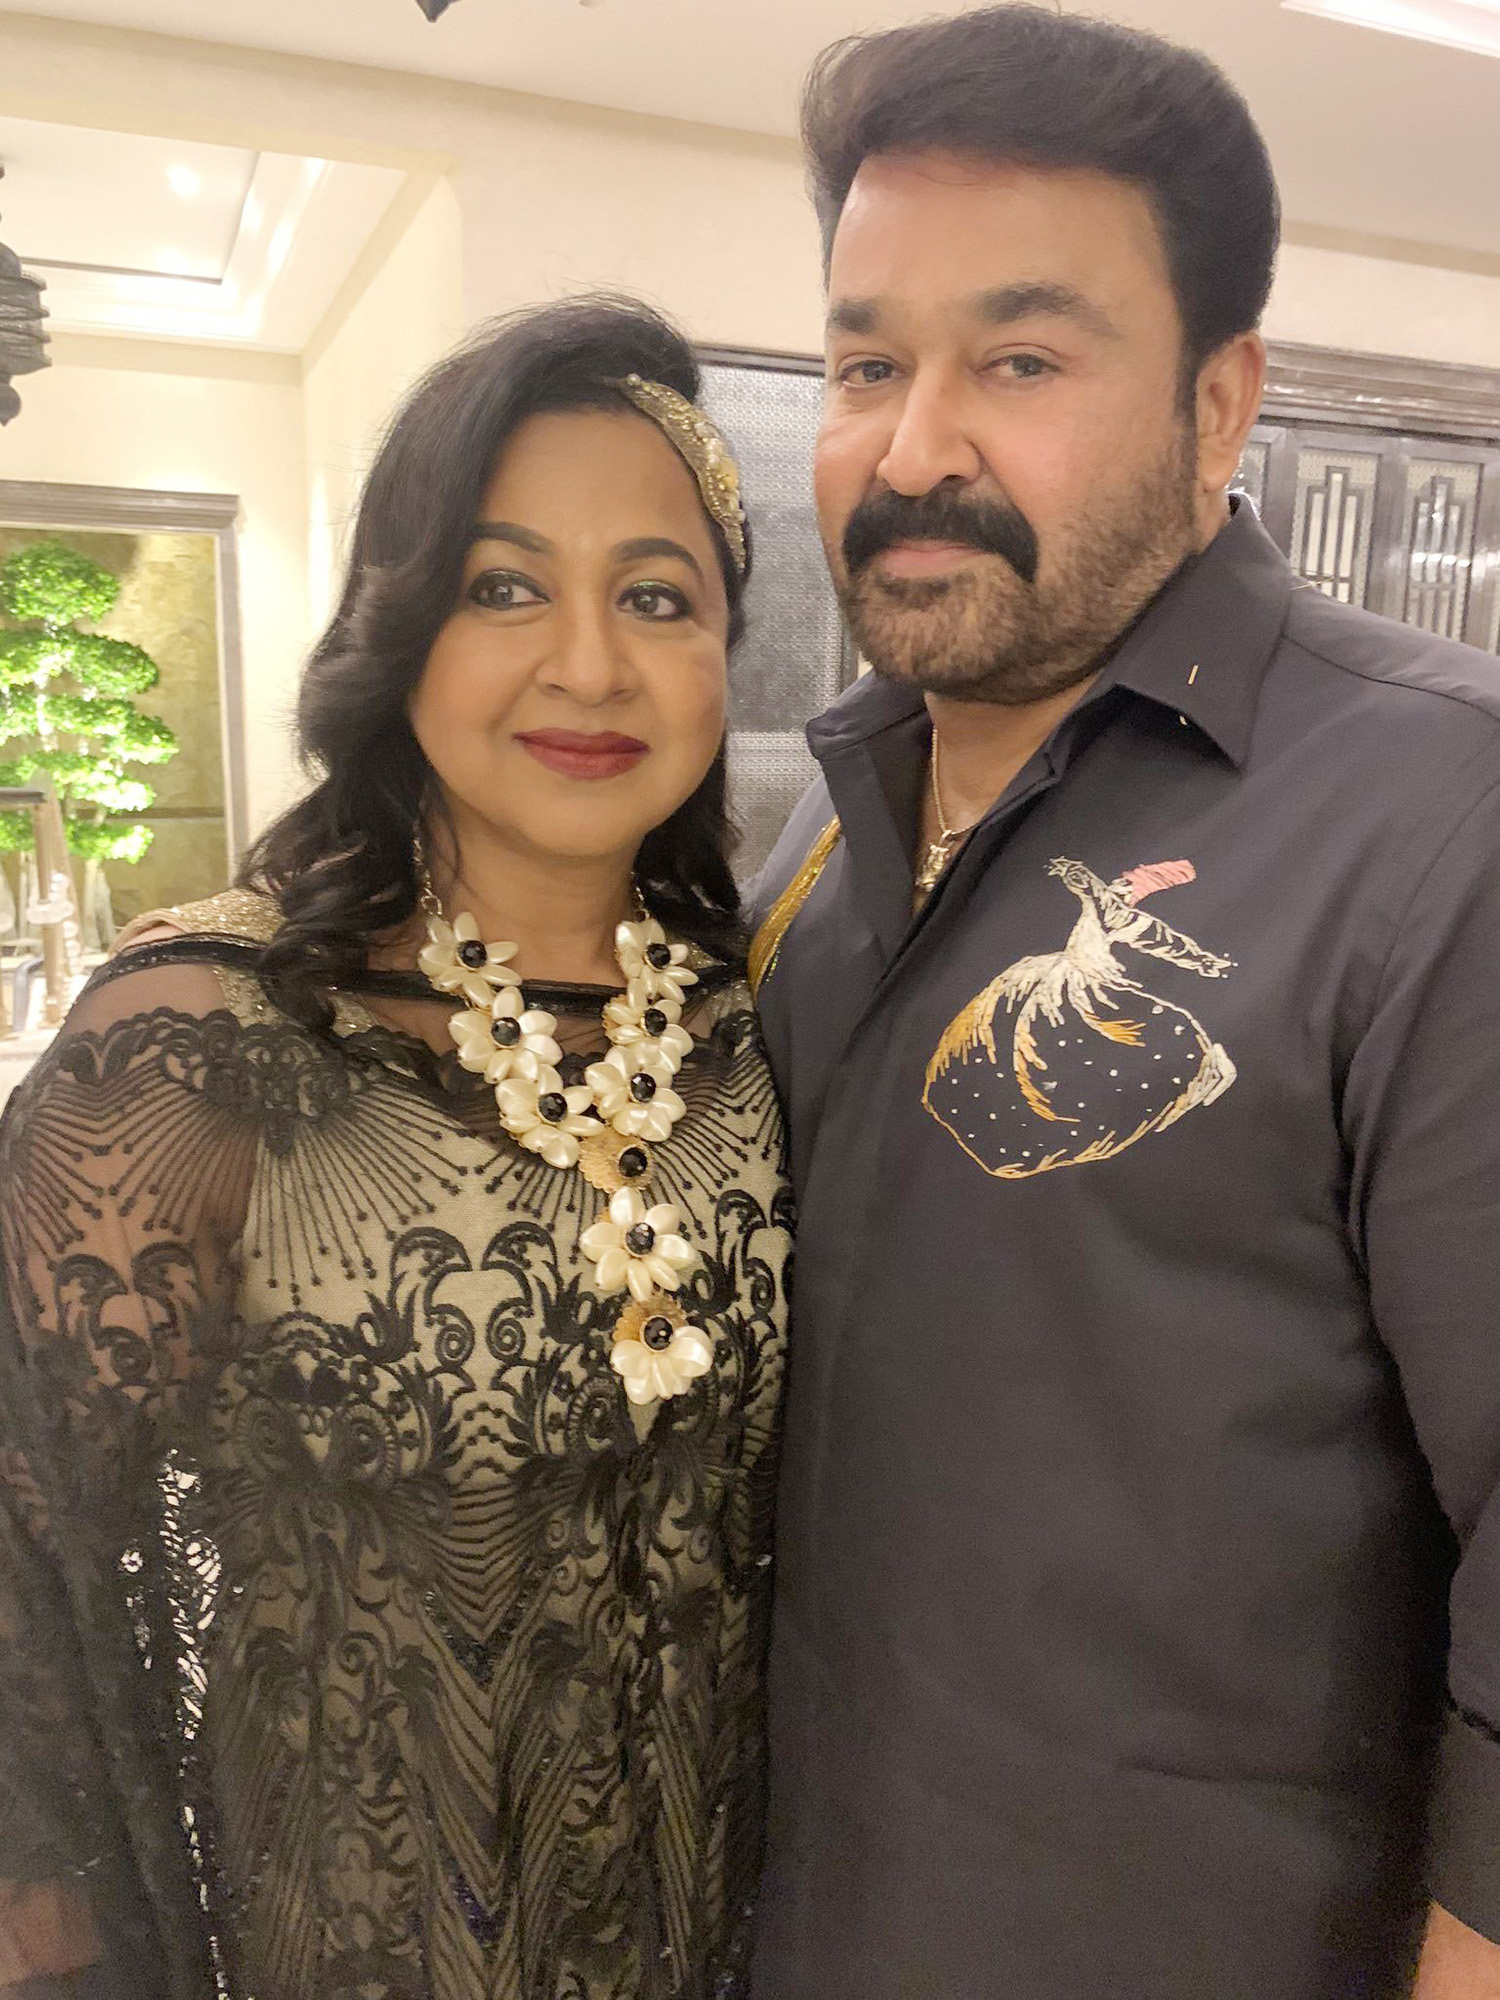 Chiranjeevi ,80's reunion,south indian film 80's reunion,80's stars reunion,80's reunion images,mohanlal chiranjeevi pics from 80's reunion,80's reunion party images